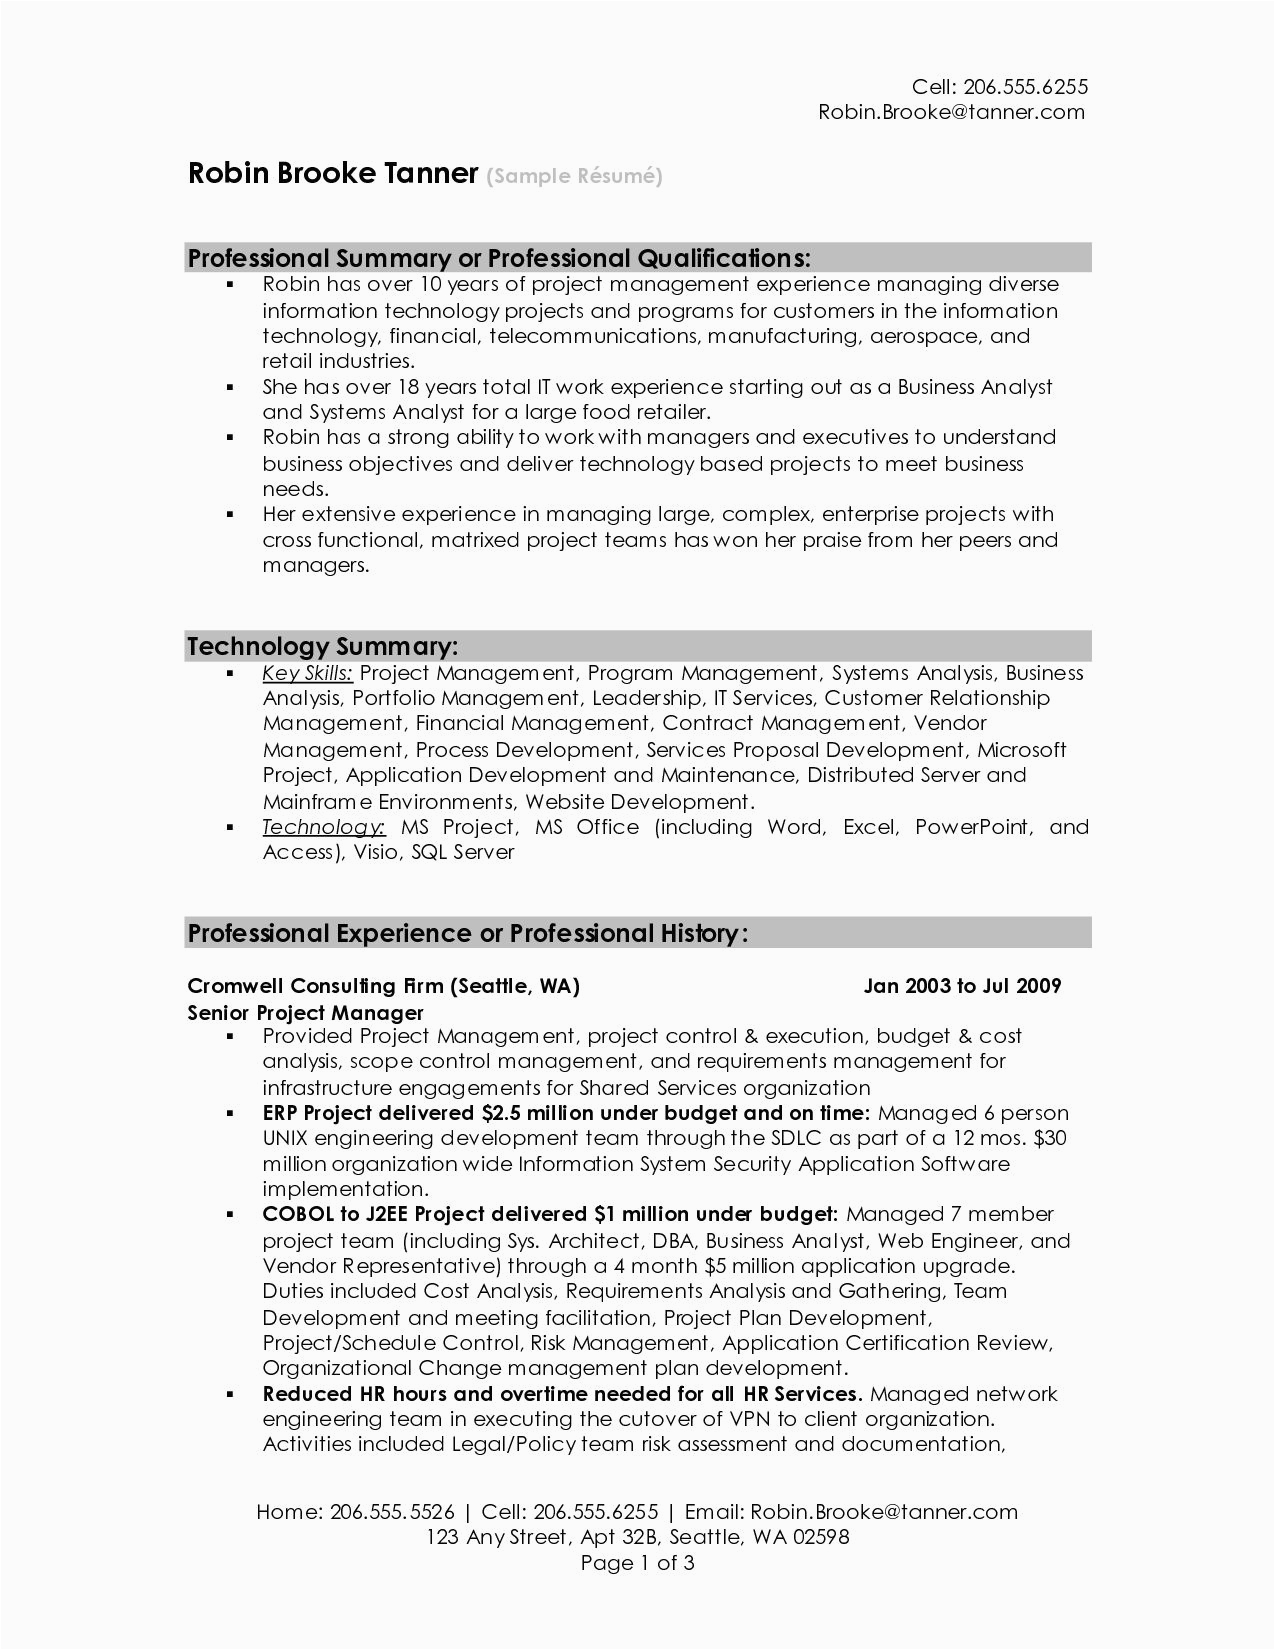 Professional Summary Resume Sample for Manager Summary Resume Sample for Examples Ideas How Make Drop